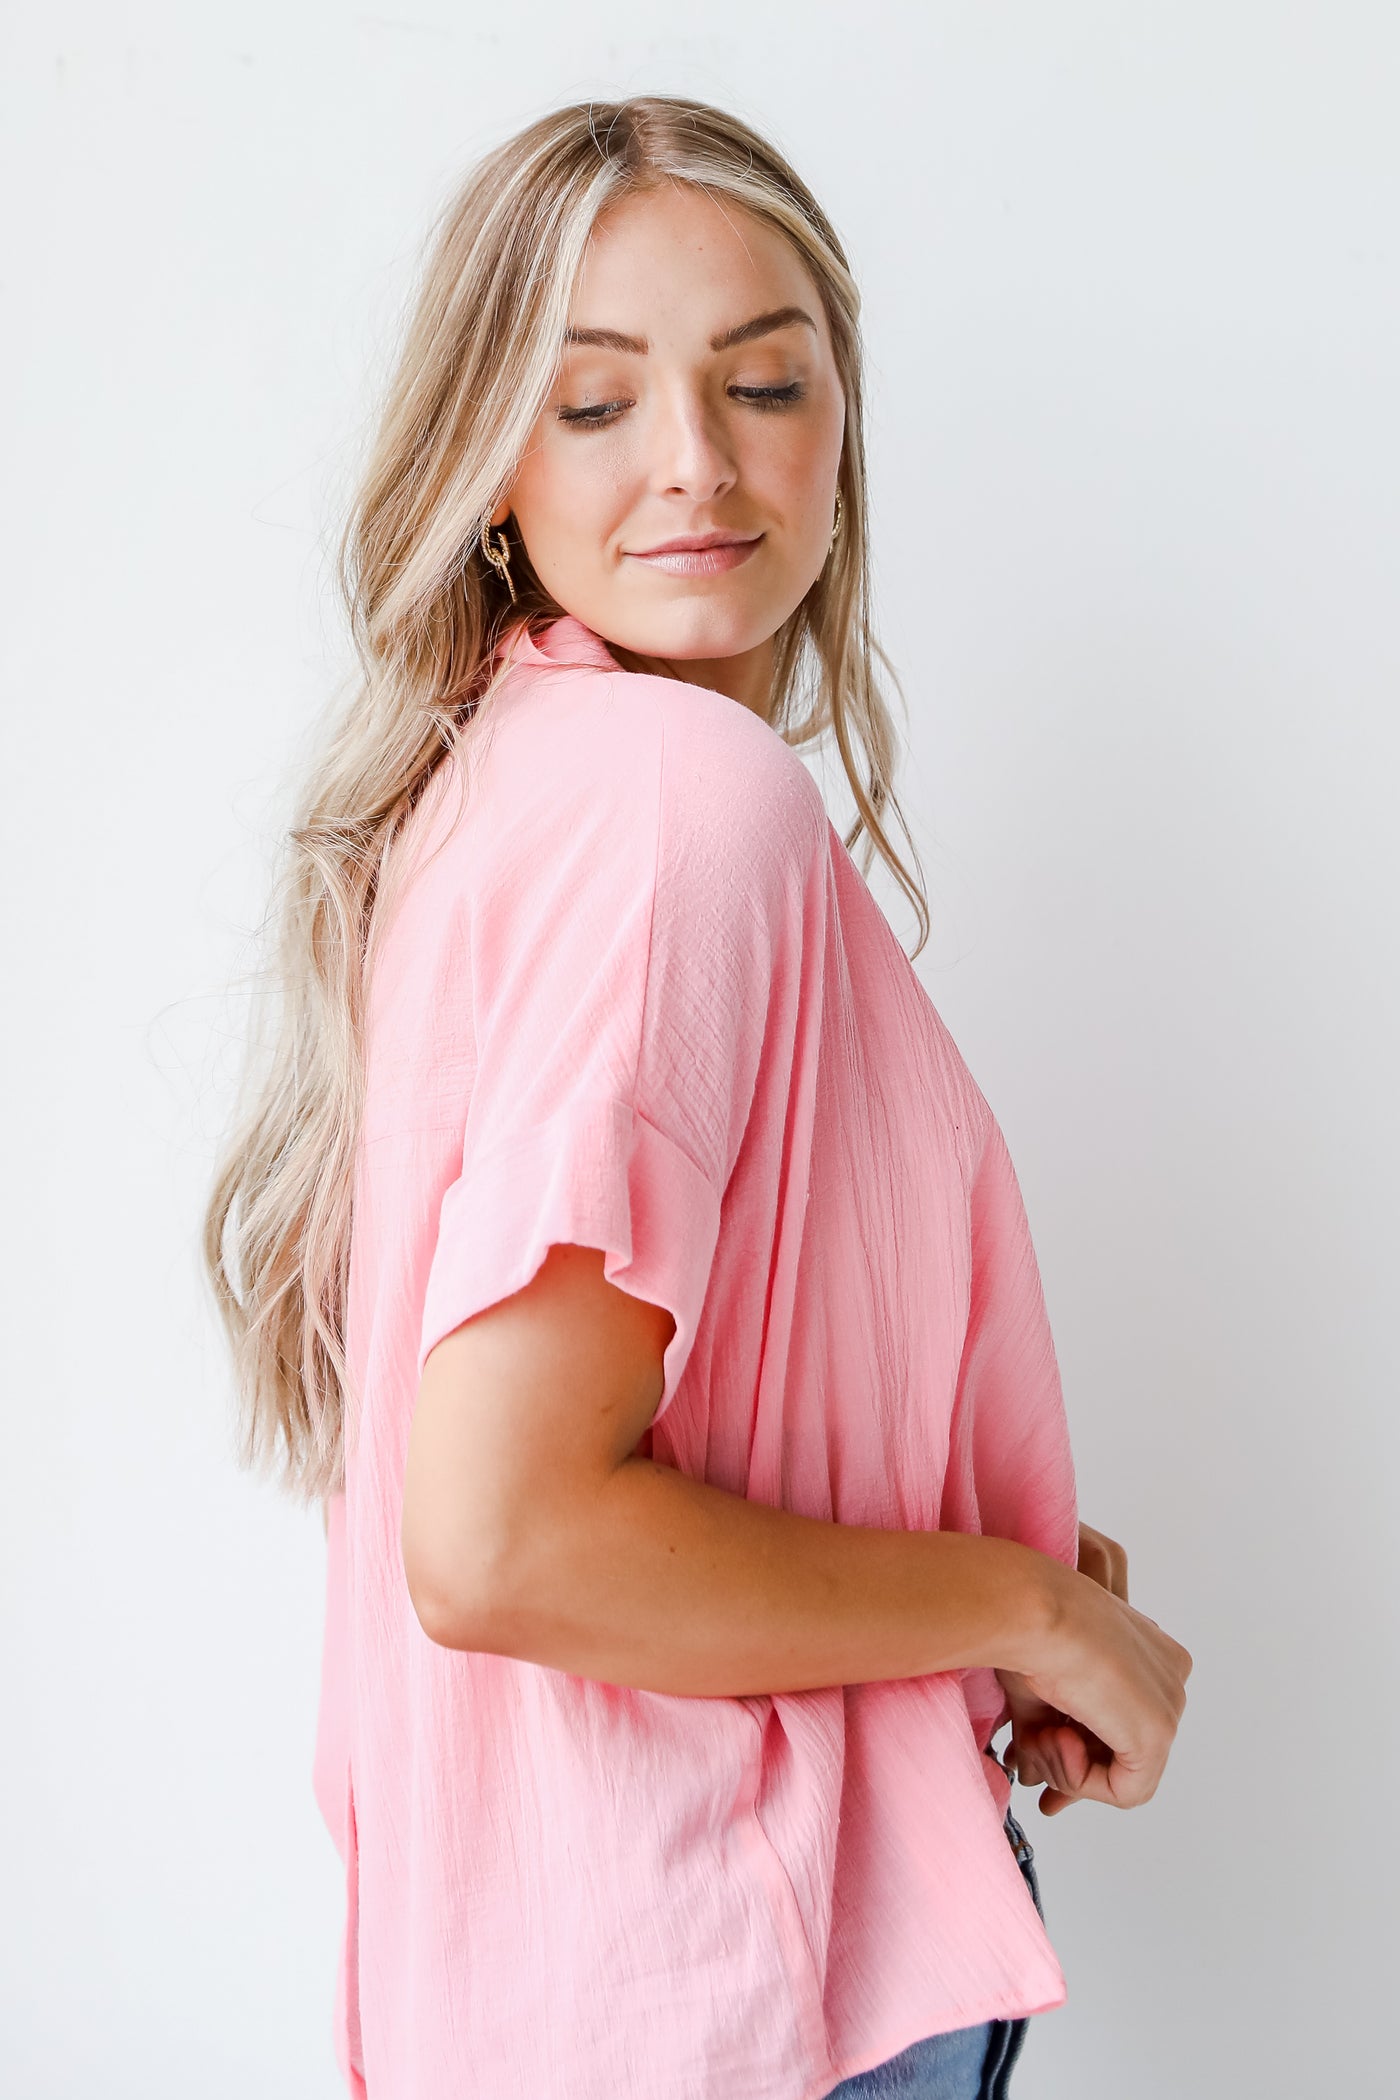 Linen Blouse in pink side view